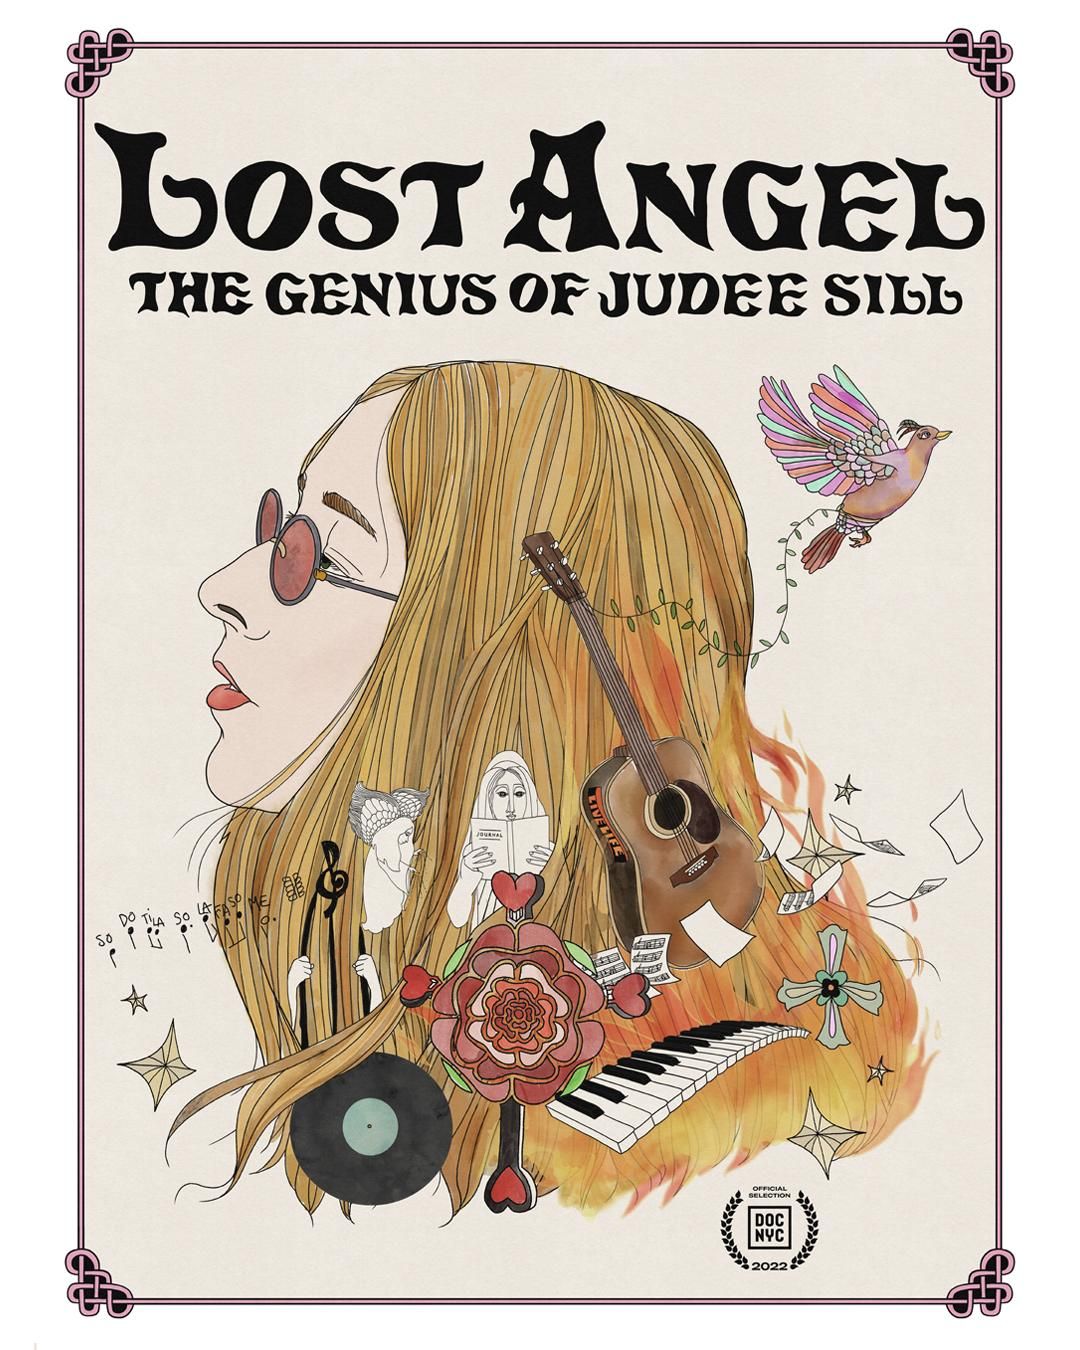 LOST ANGEL: THE GENIUS OF JUDEE SILL WITH A Q&A BY THE FILM'S DIRECTOR ANDY BROWN  